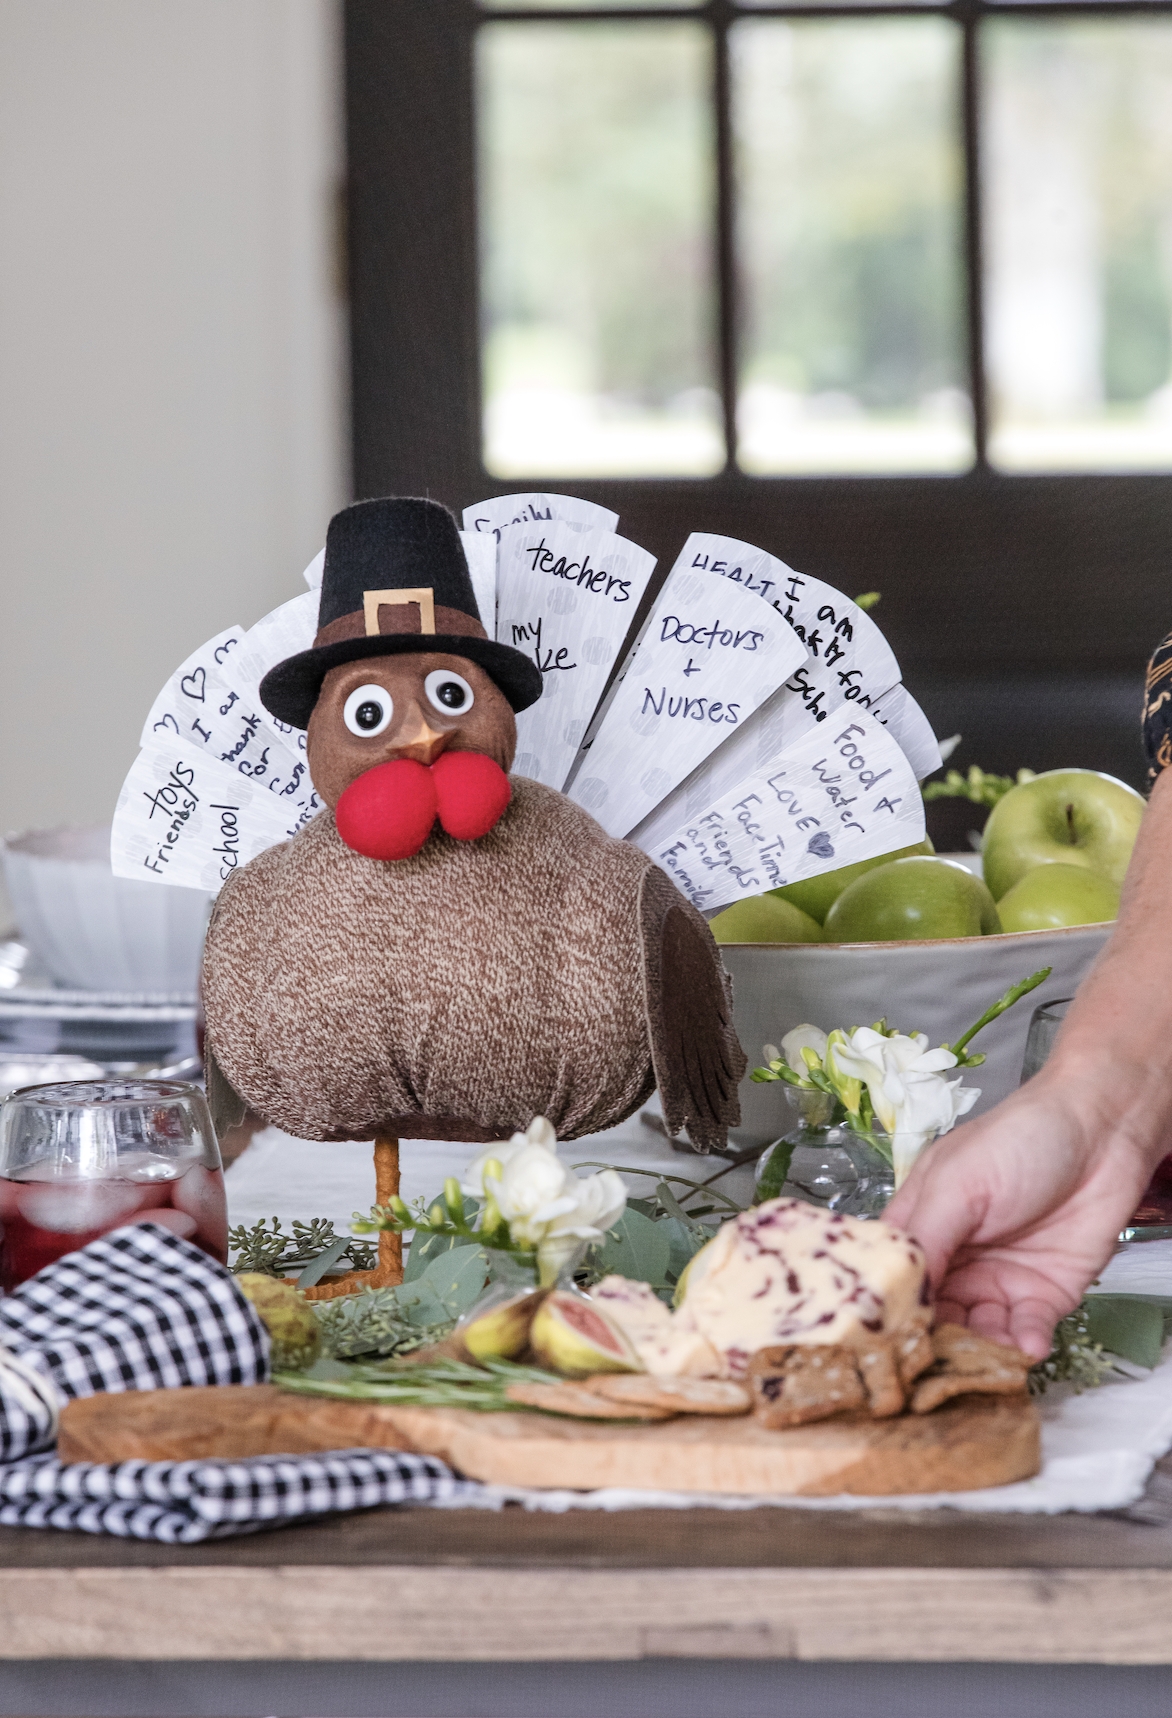 Make a Turkey on the Table